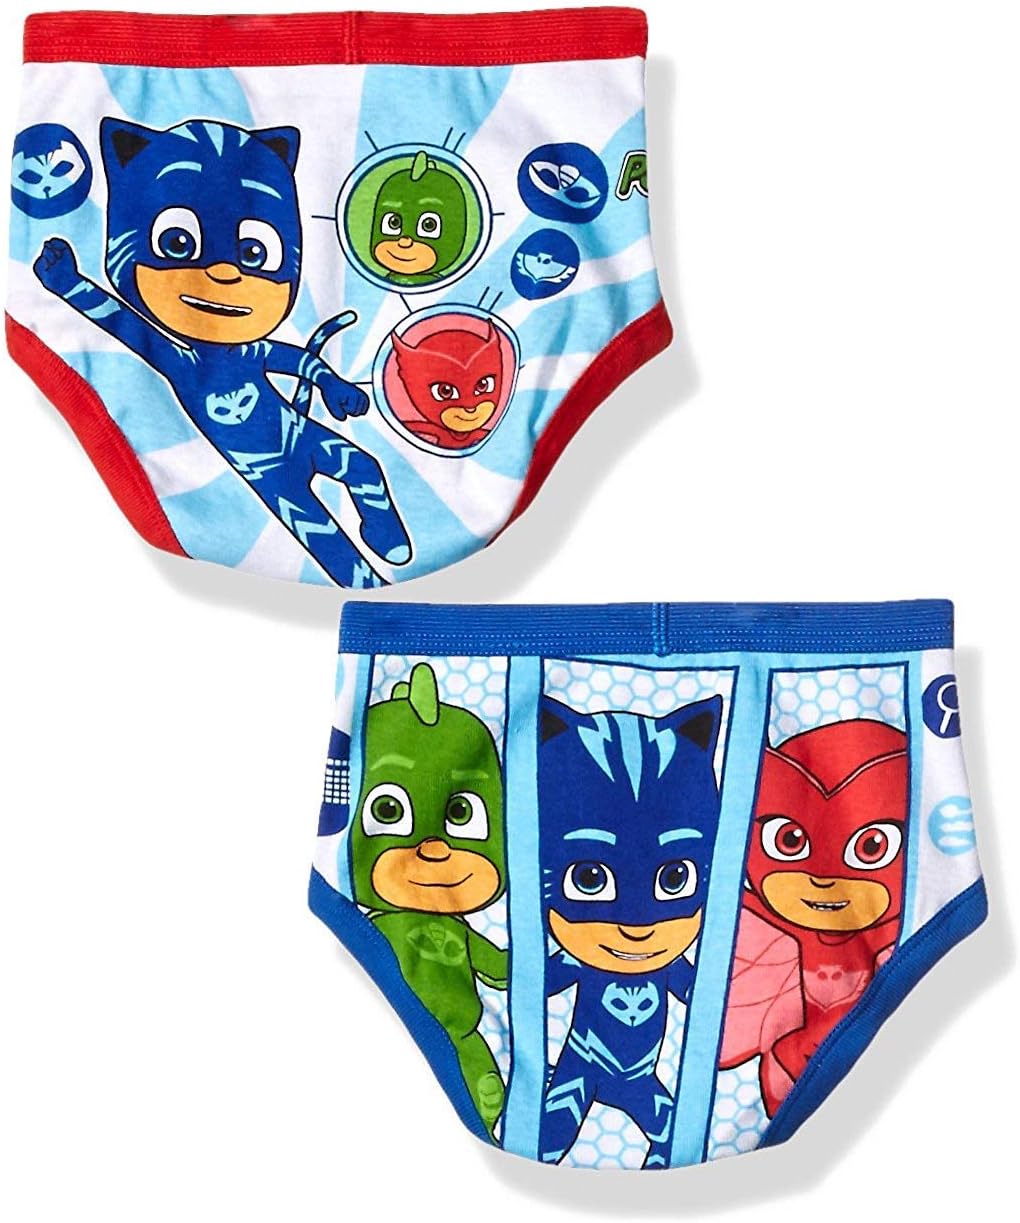 PJ Masks Boys' 100% Combed Cotton Brief Multipacks with Catboy, Luna Girl, Owlette and More in Sizes 2/3t, 4t, 4, 6 and 8